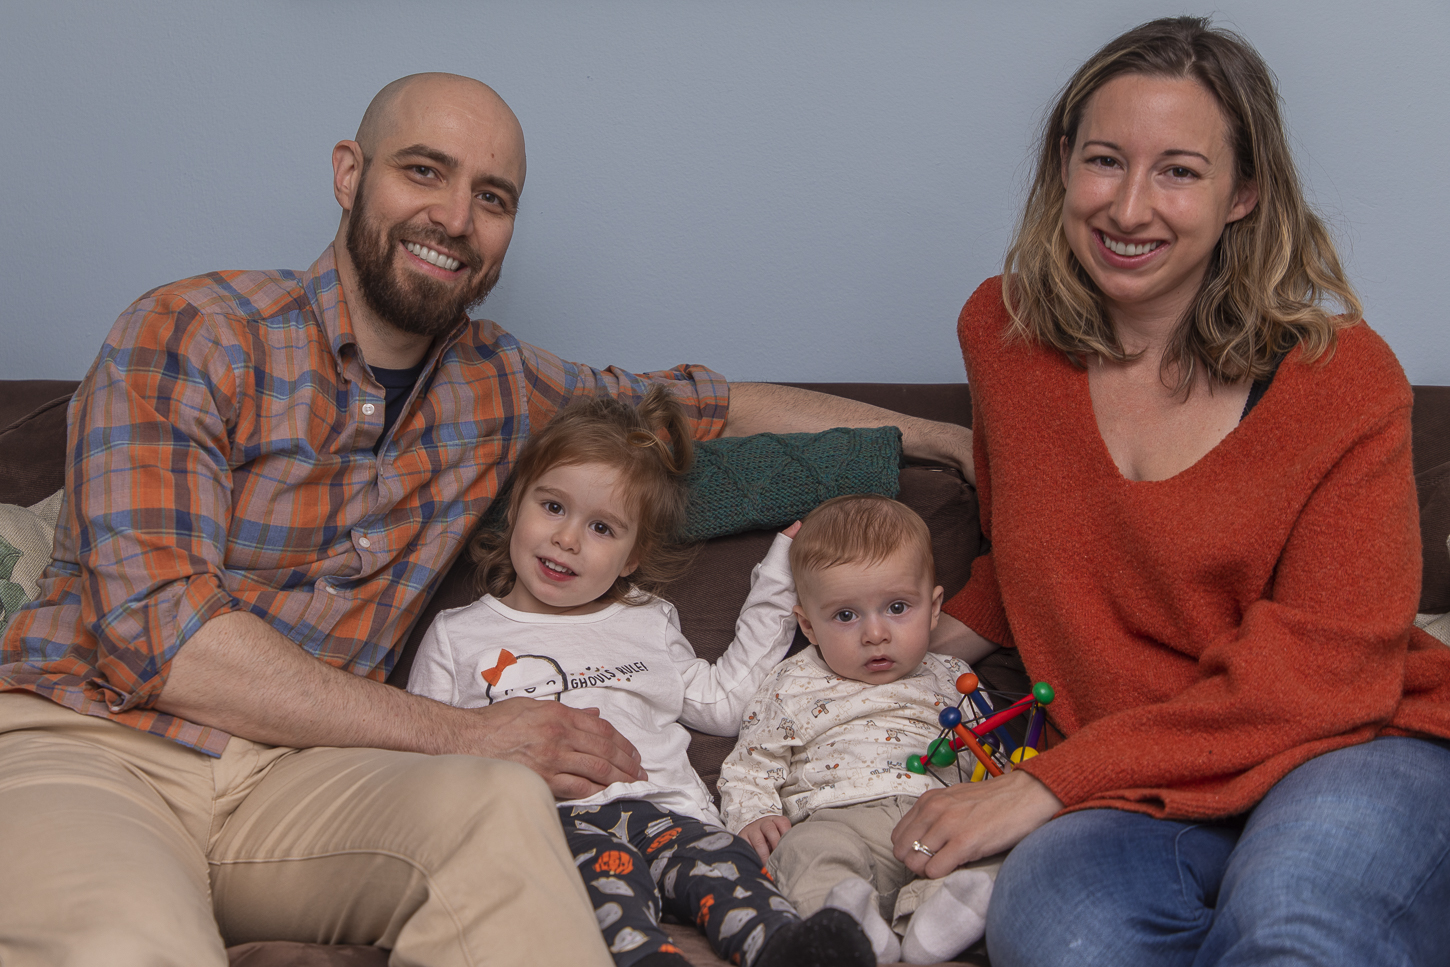 Arthur Migliazza, left, and his wife sit on their couch. Their young daughter and newborn son sit in between them. They are all looking at the camera and smiling. Arthur is wearing an orange and blue plaid flannel shirt and khaki pants. His wife is wearing an orange jumper and blue jeans. Their newborn is wearing a white t-shirt and khaki pants. Their daughter is wearing a white graphic t-shirt and navy graphic pants.